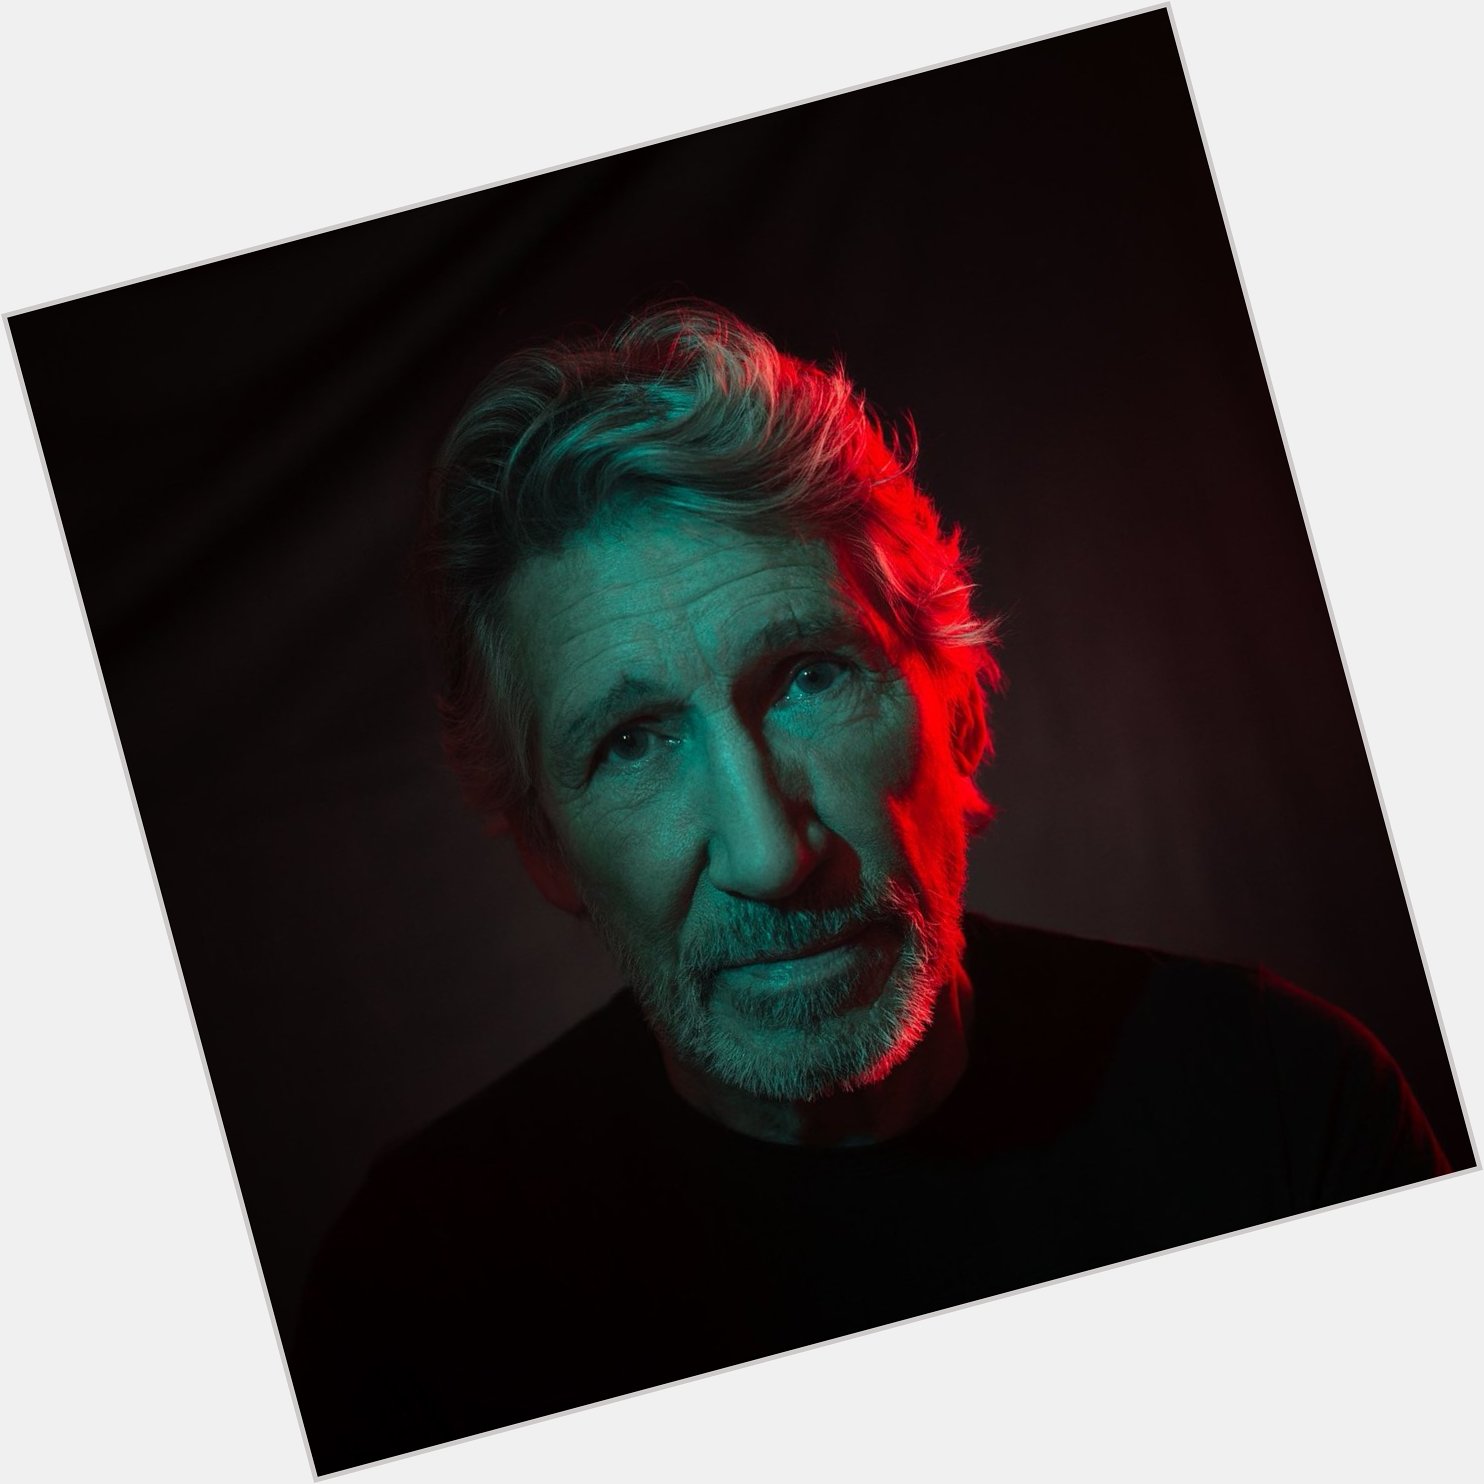 Happy birthday, Roger Waters. Revisit our in-depth 2019 interview with him:  